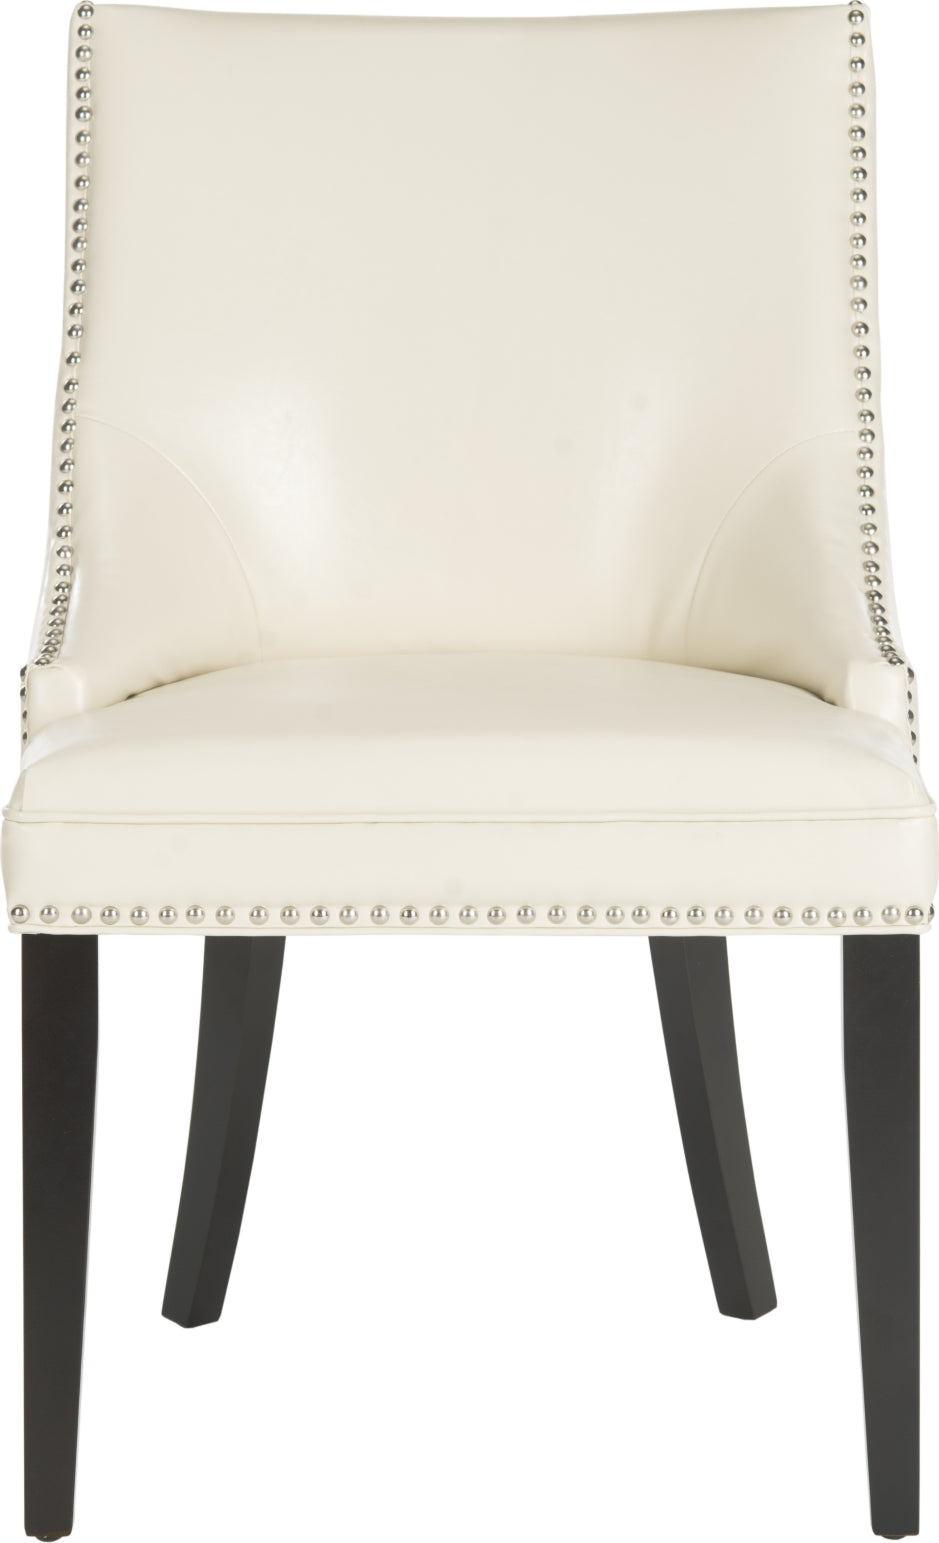 Safavieh Afton Side Chair (SET Of 2)-Nickel Nail Heads Flat Cream and Espresso main image